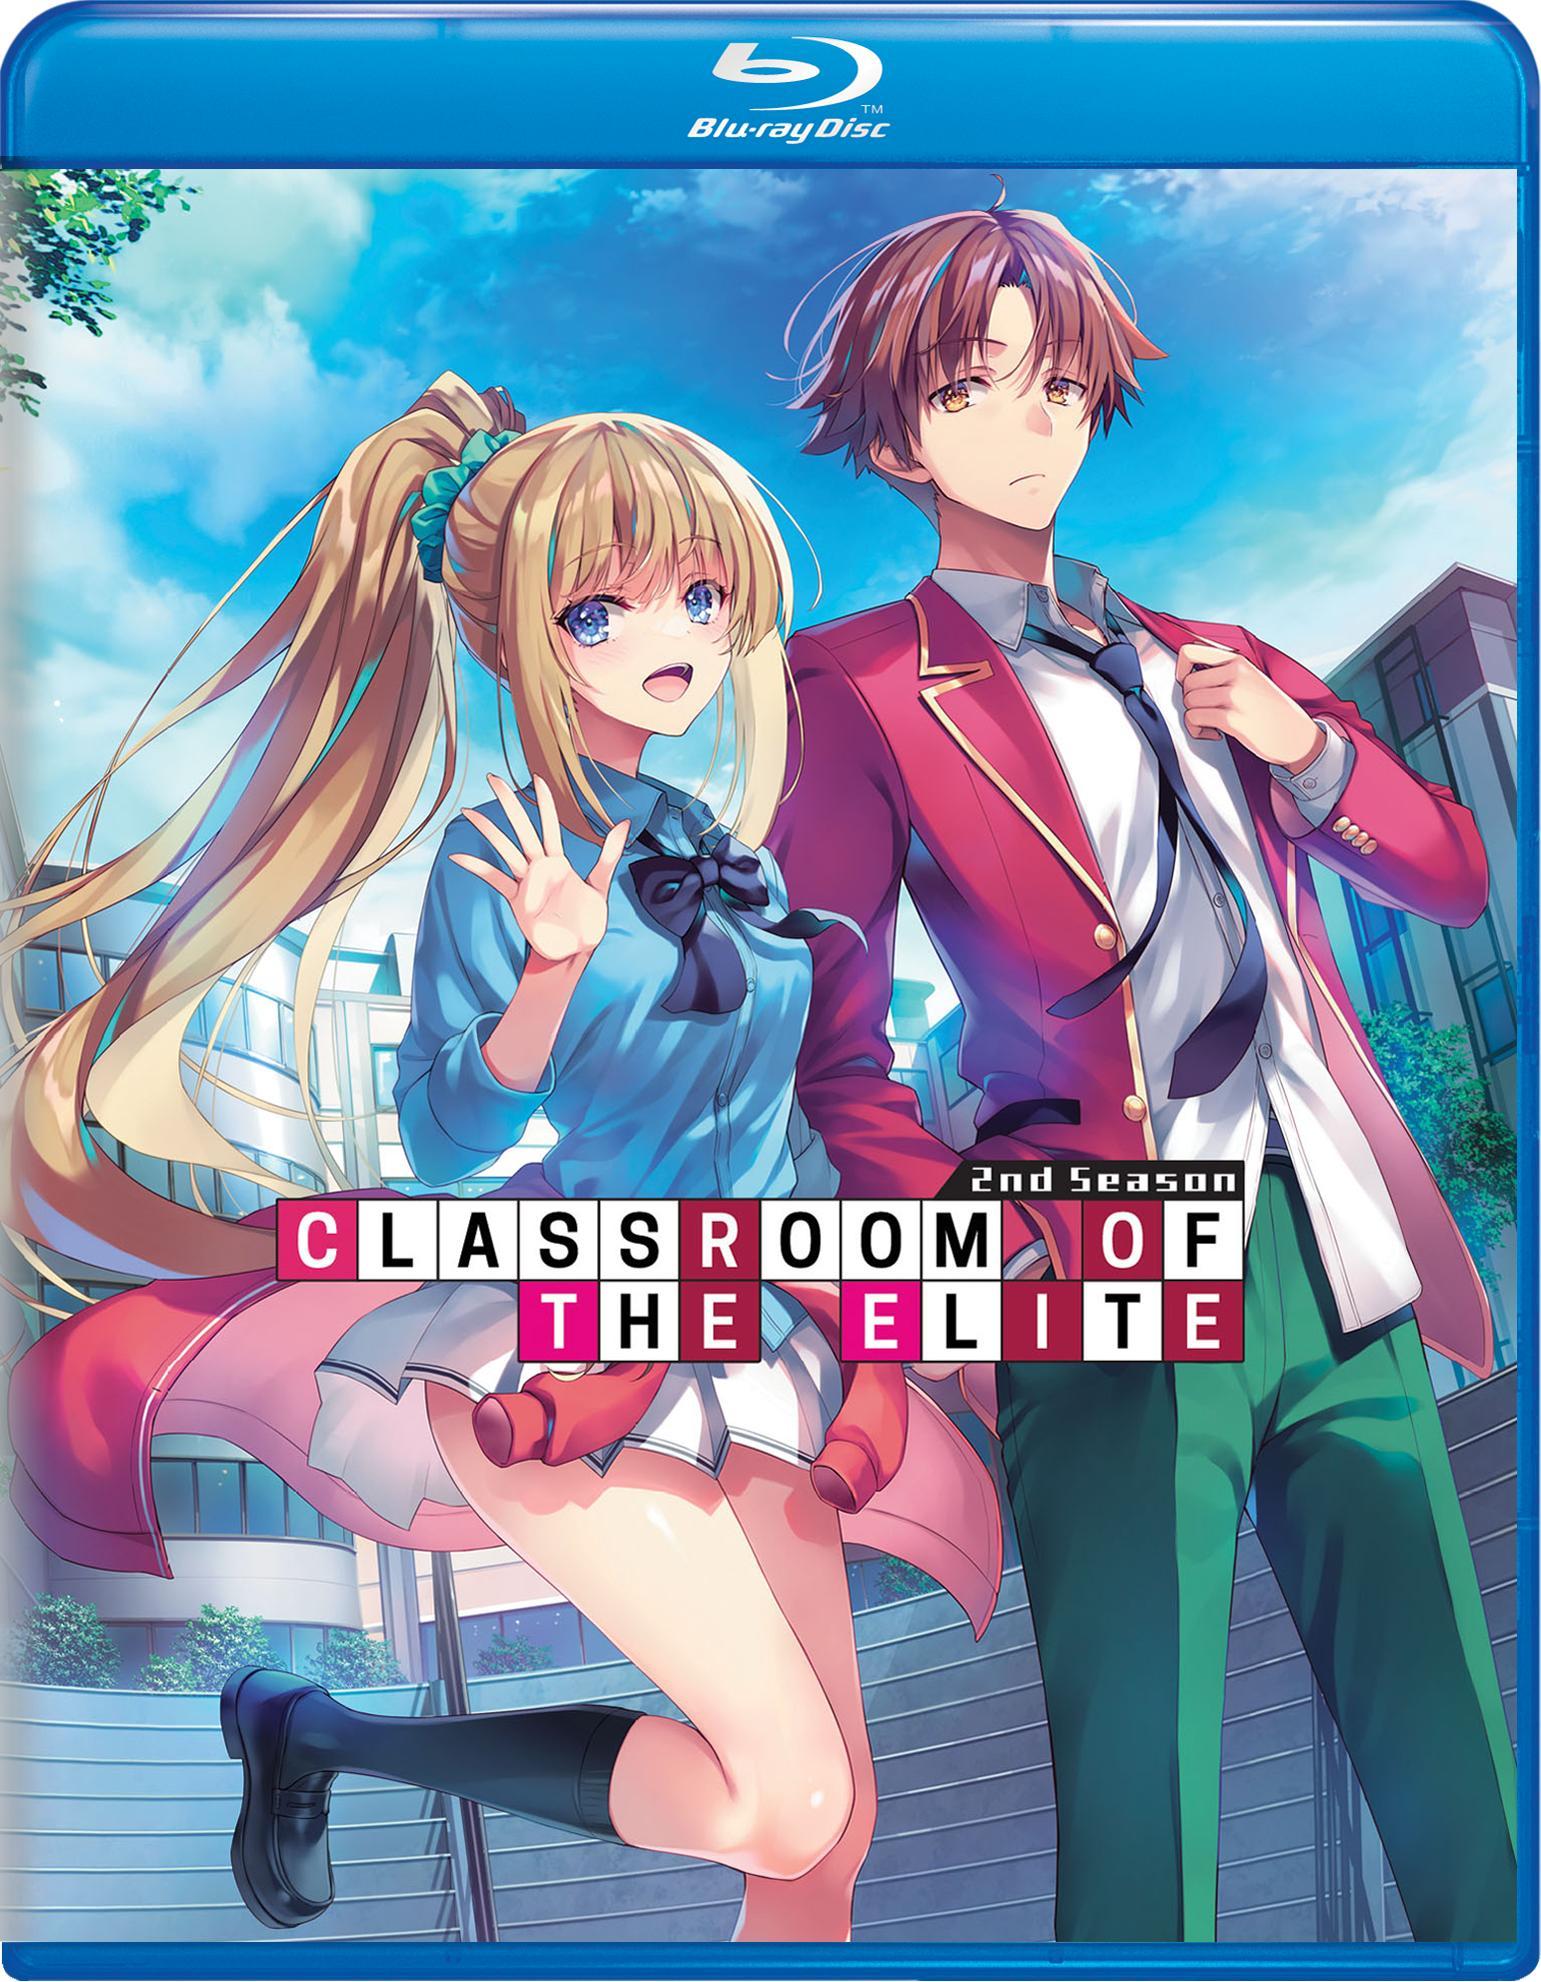 Classroom of the Elite: The Complete Series [Blu-ray]